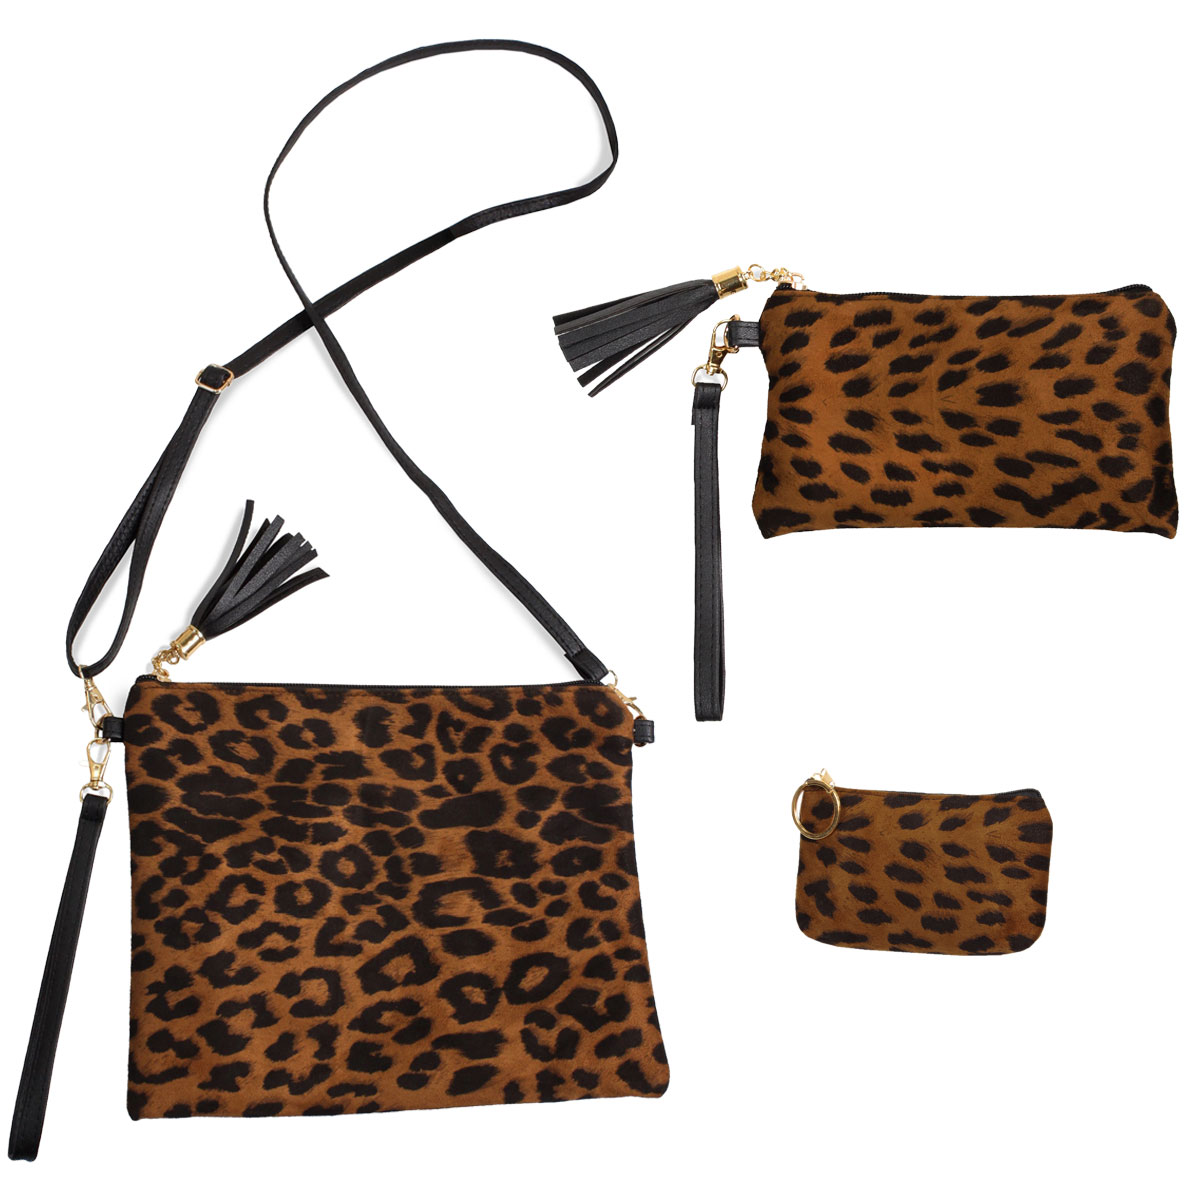 3136 Animal Print  Bags, Wristlets + Purses 9378 DARK LEOPARD PRINT SUEDED Crossbody Bag and Coin Purse 2 Pc. Set  - 